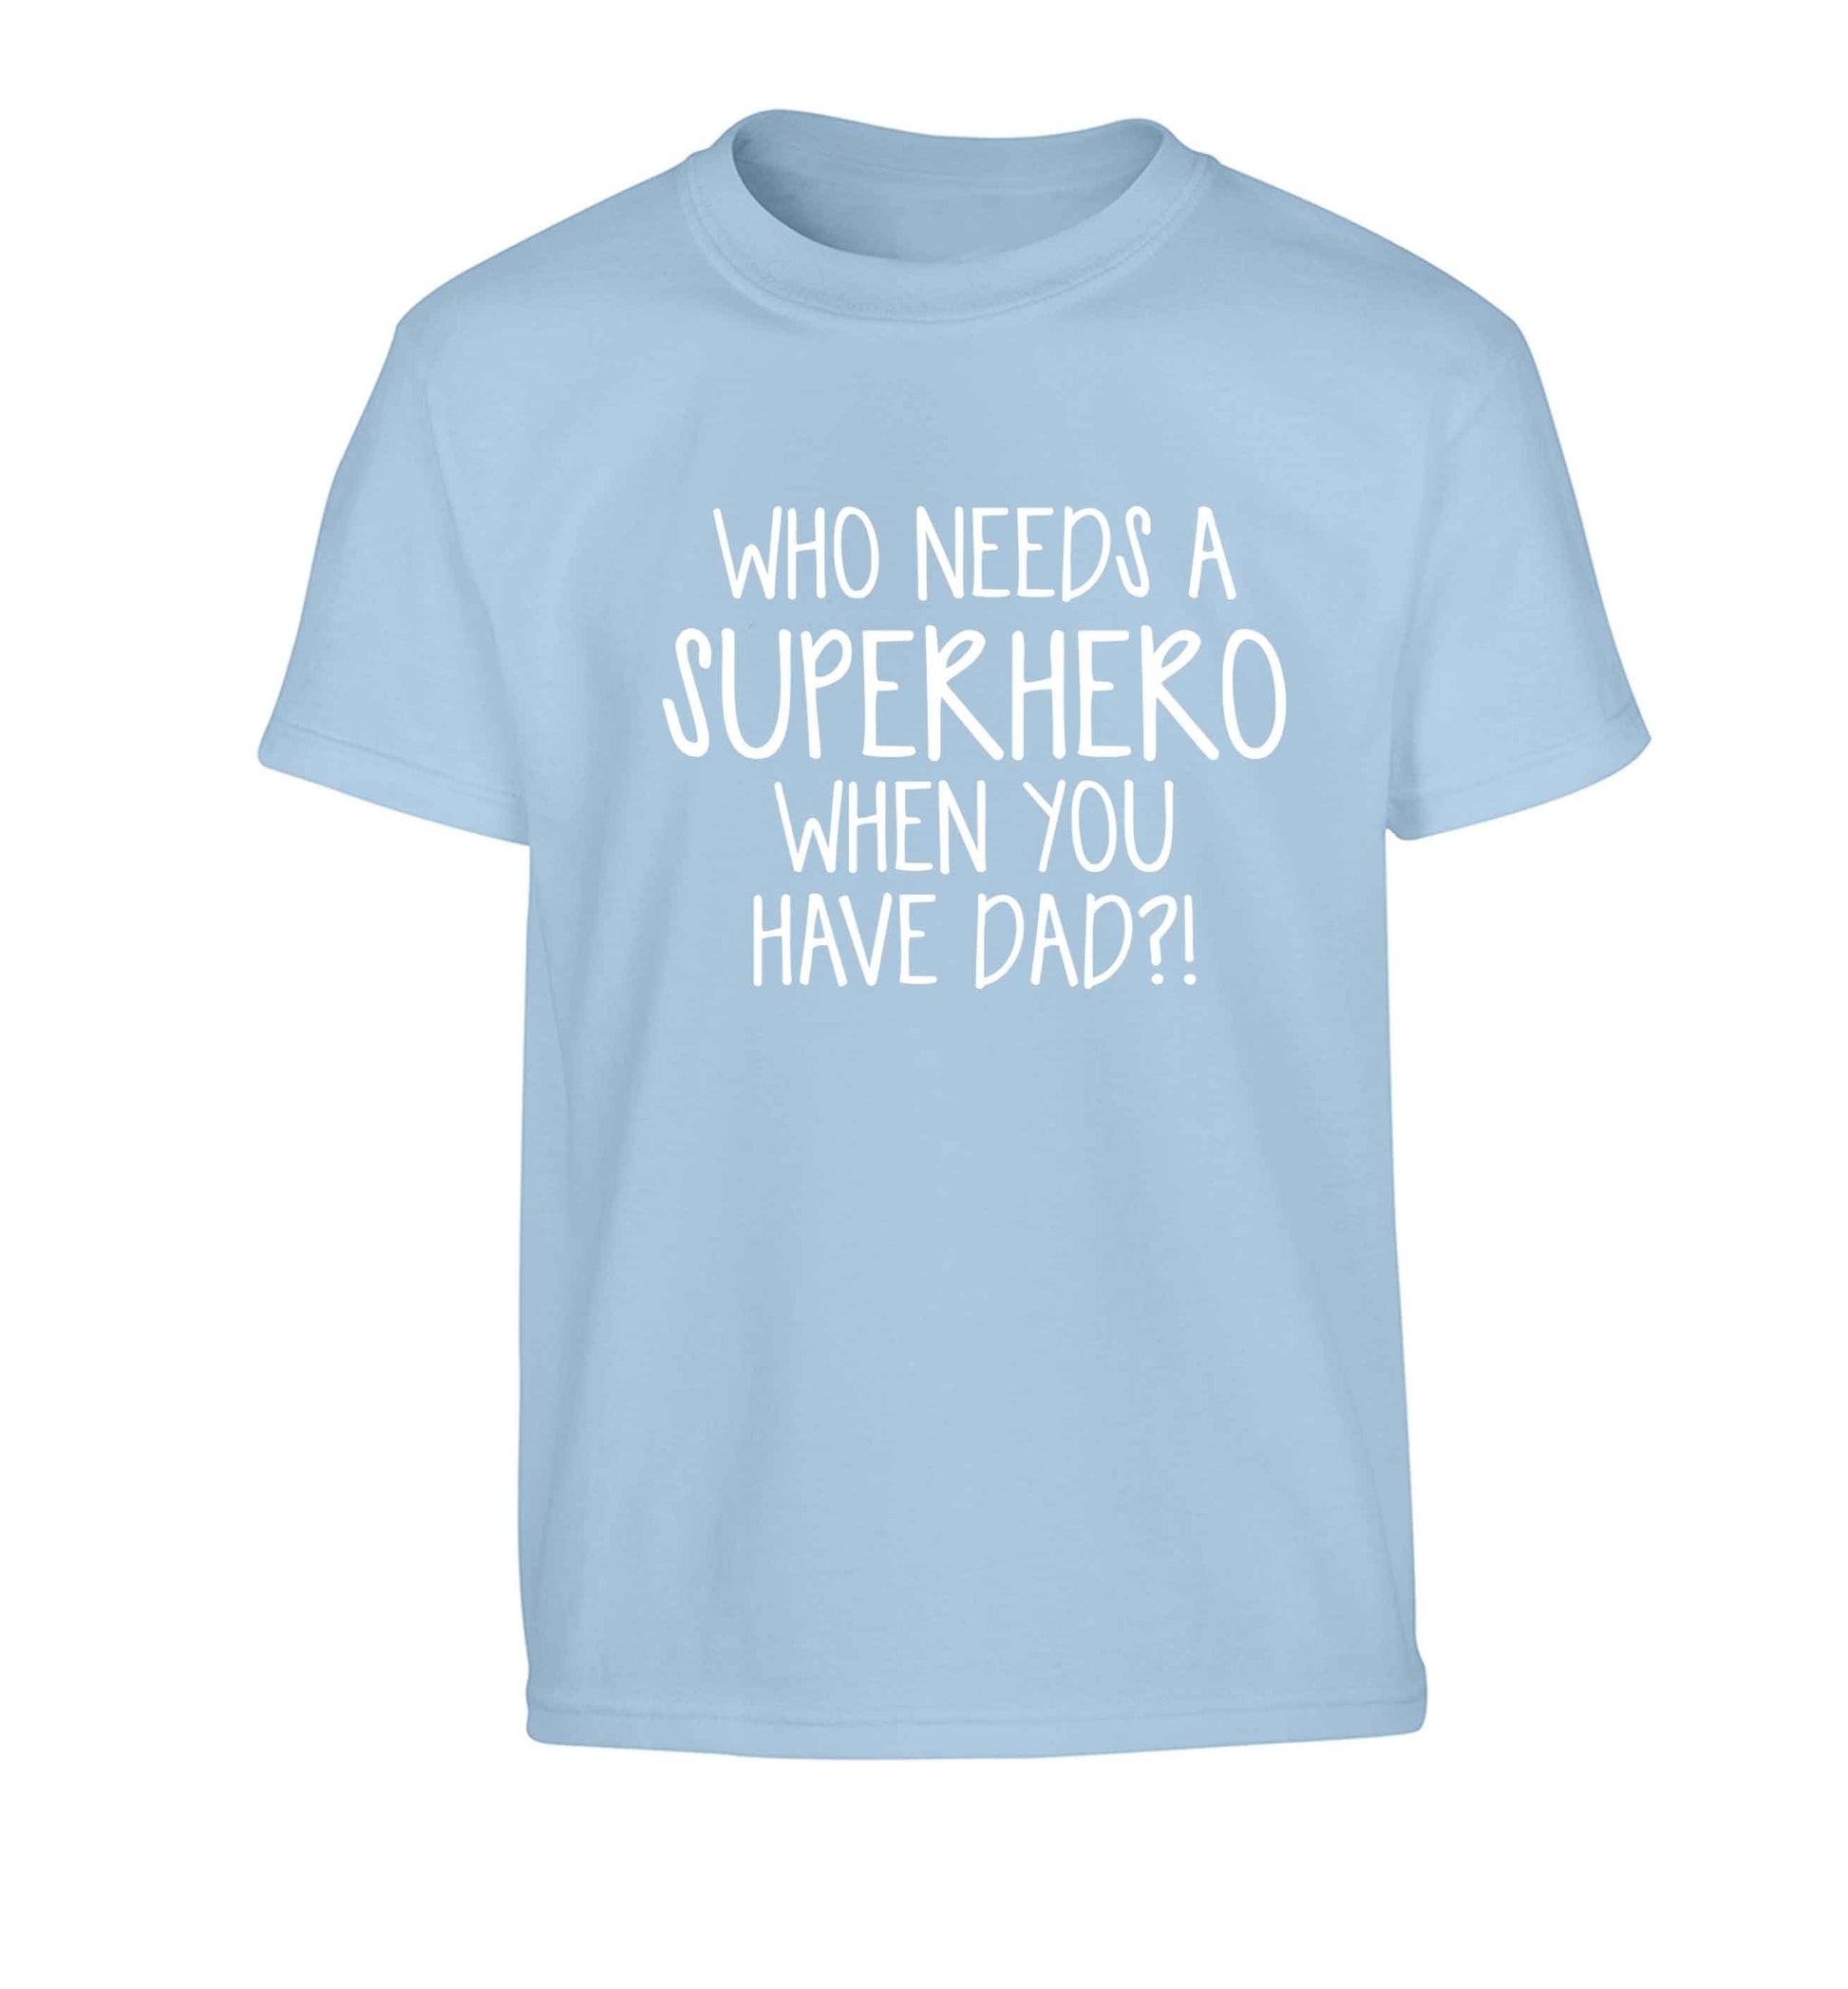 Who needs a superhero when you have dad! Children's light blue Tshirt 12-13 Years